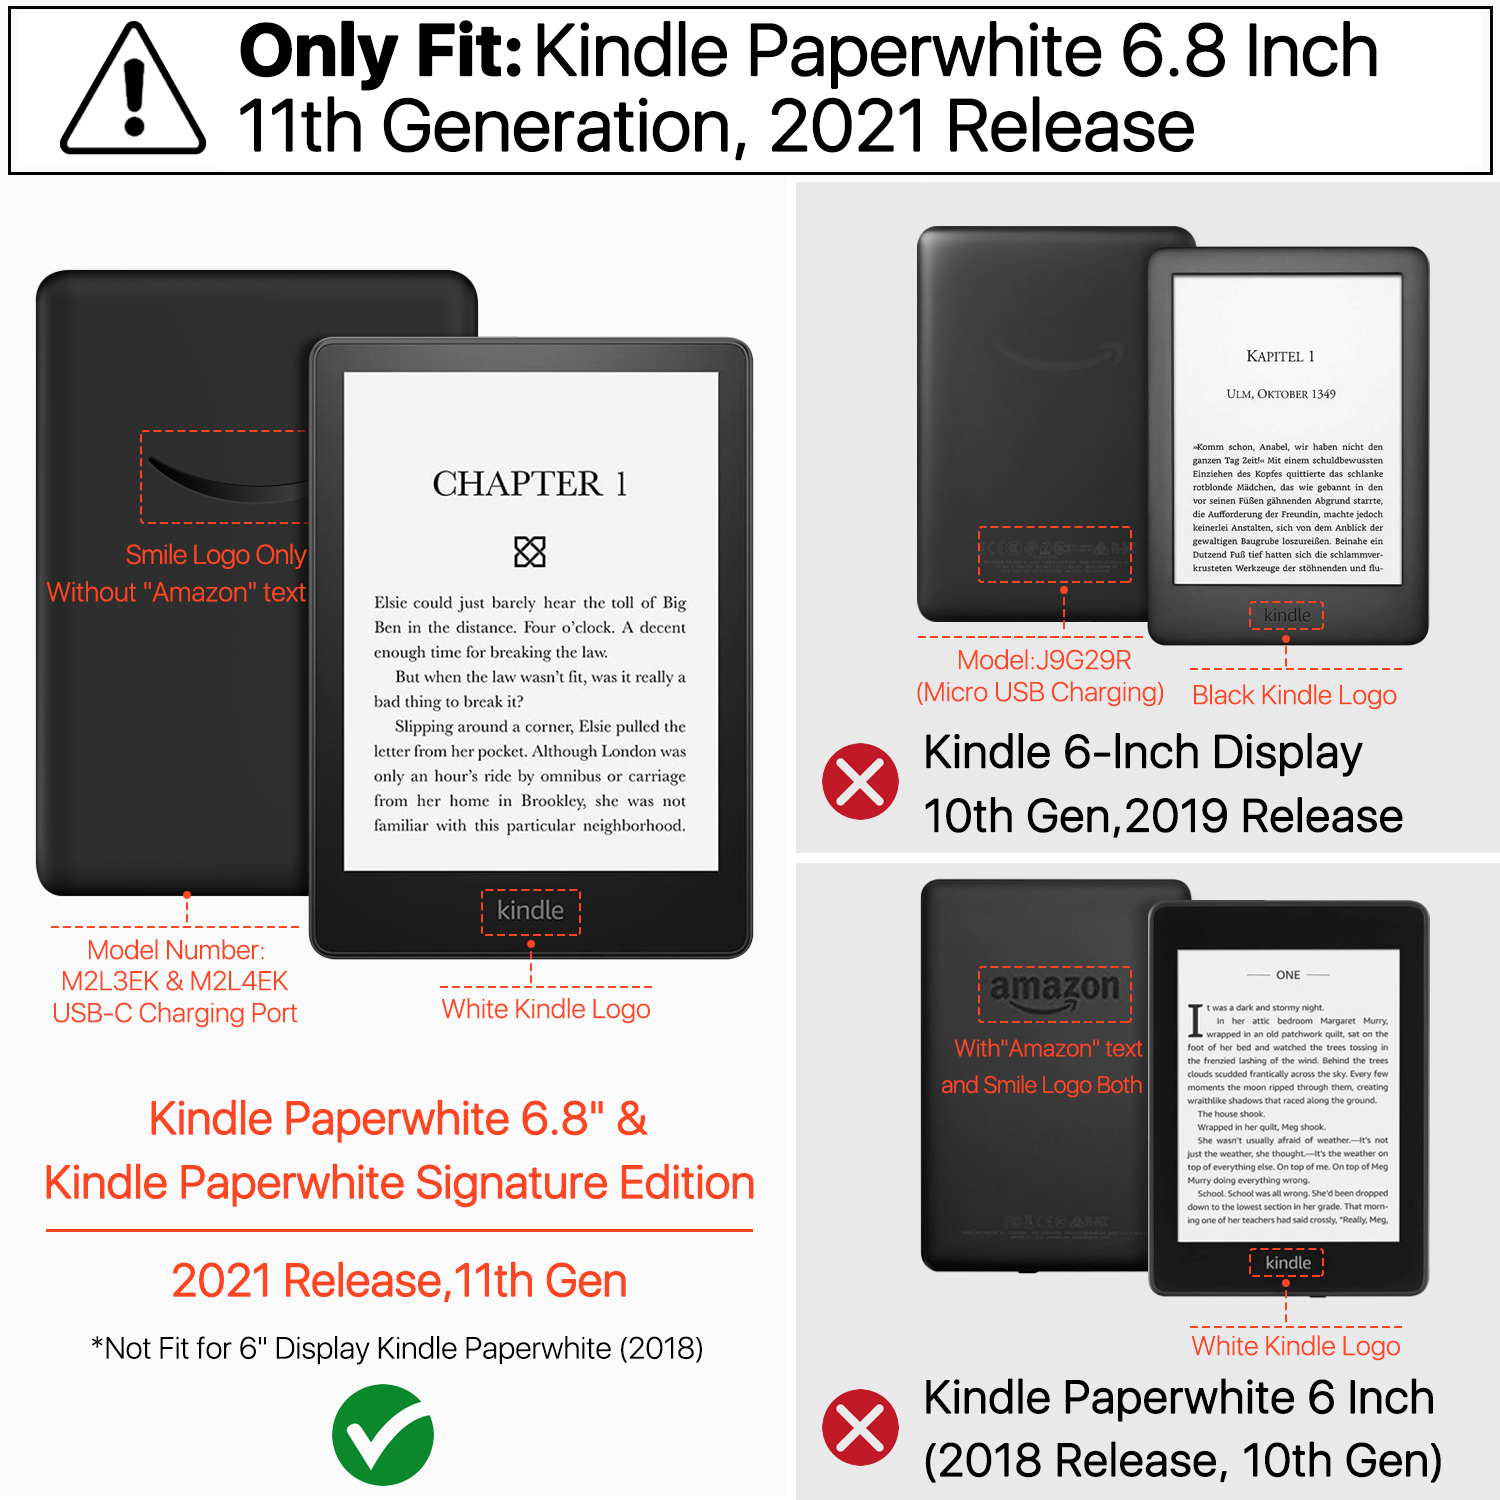 Designed specifically for 6.8-Inch Kindle E-reader, compatible with Amazon 6.8" Kindle Paperwhite, Model: M2L3EK / Kindle Paperwhite Signature Edition, Model: M2L4EK (11th Generation, 2021 Release), not compatible with other models